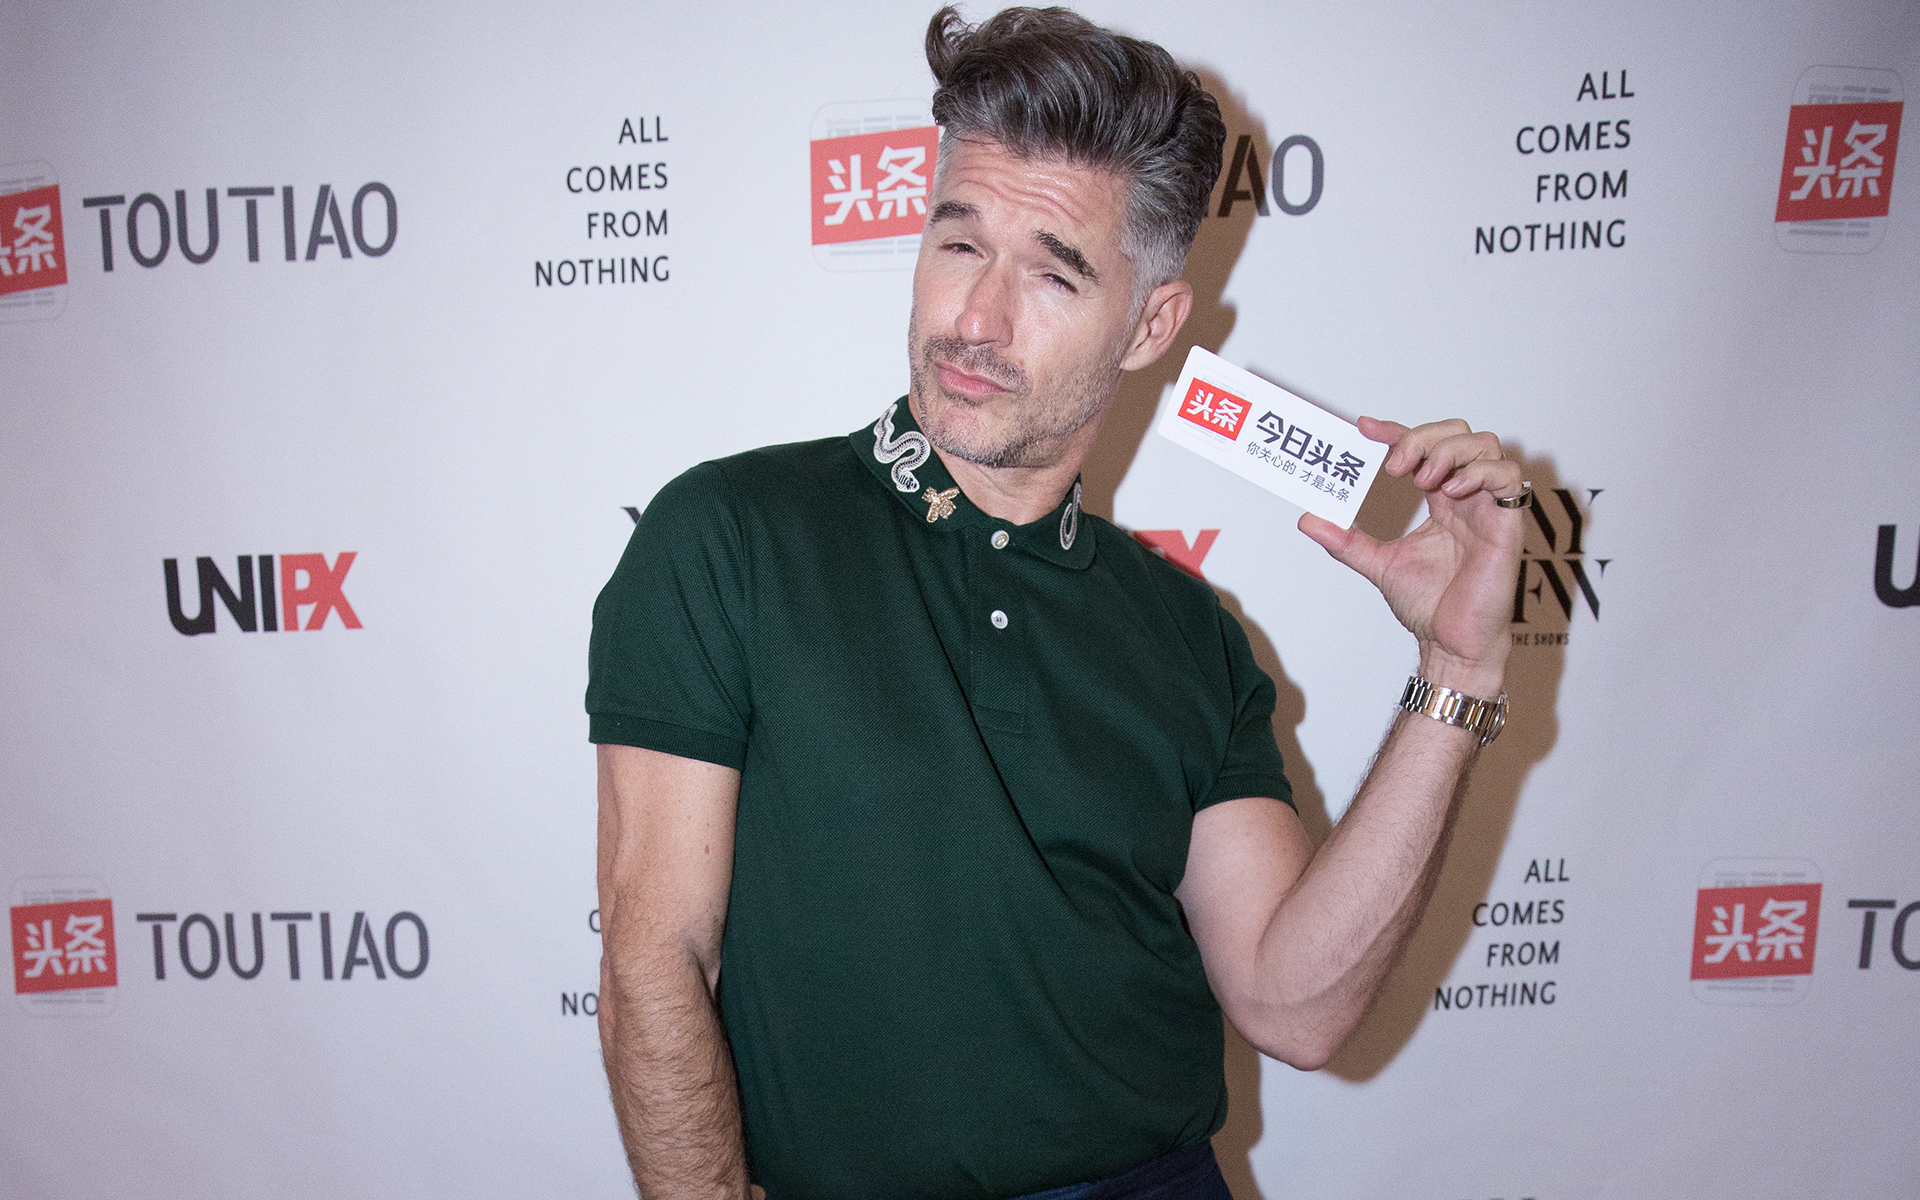 Eric Rutherford x Toutiao - UNIPX MEDIA BRAND MANAGEMENT